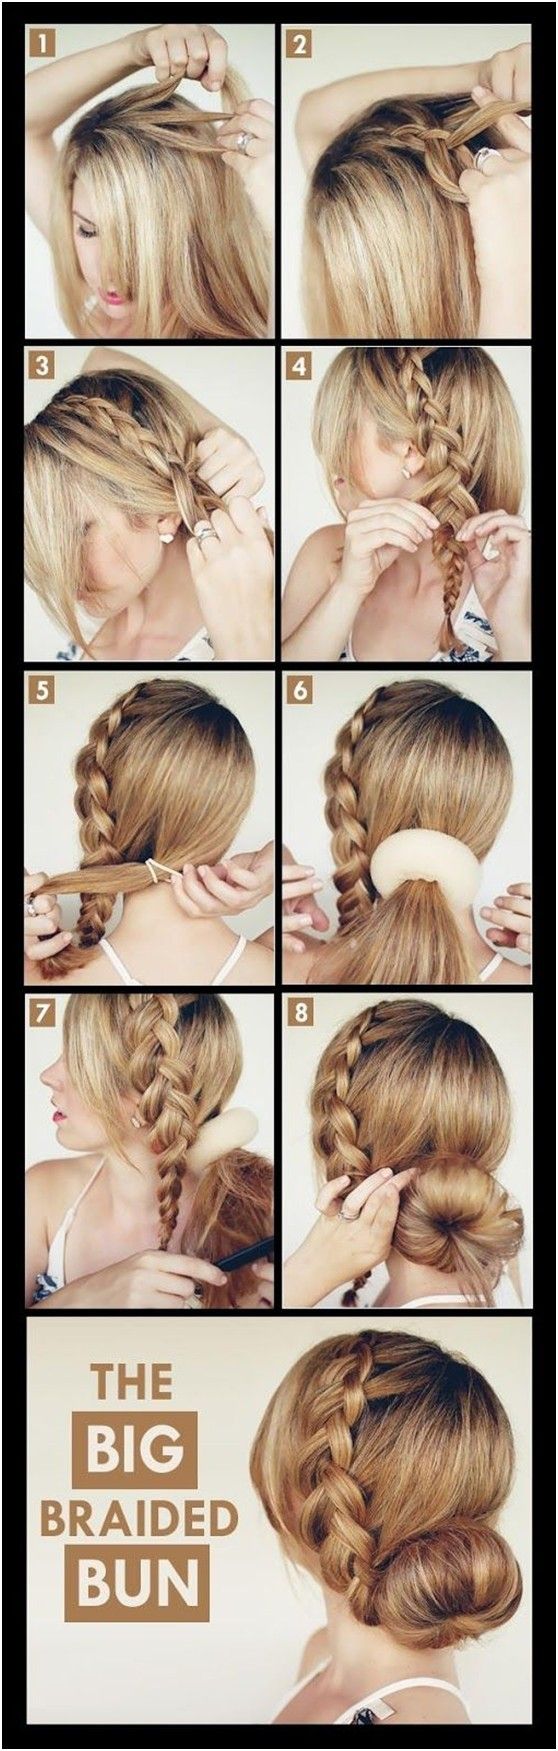 19 Fabulous Braided Updo Hairstyles With Tutorials Pretty